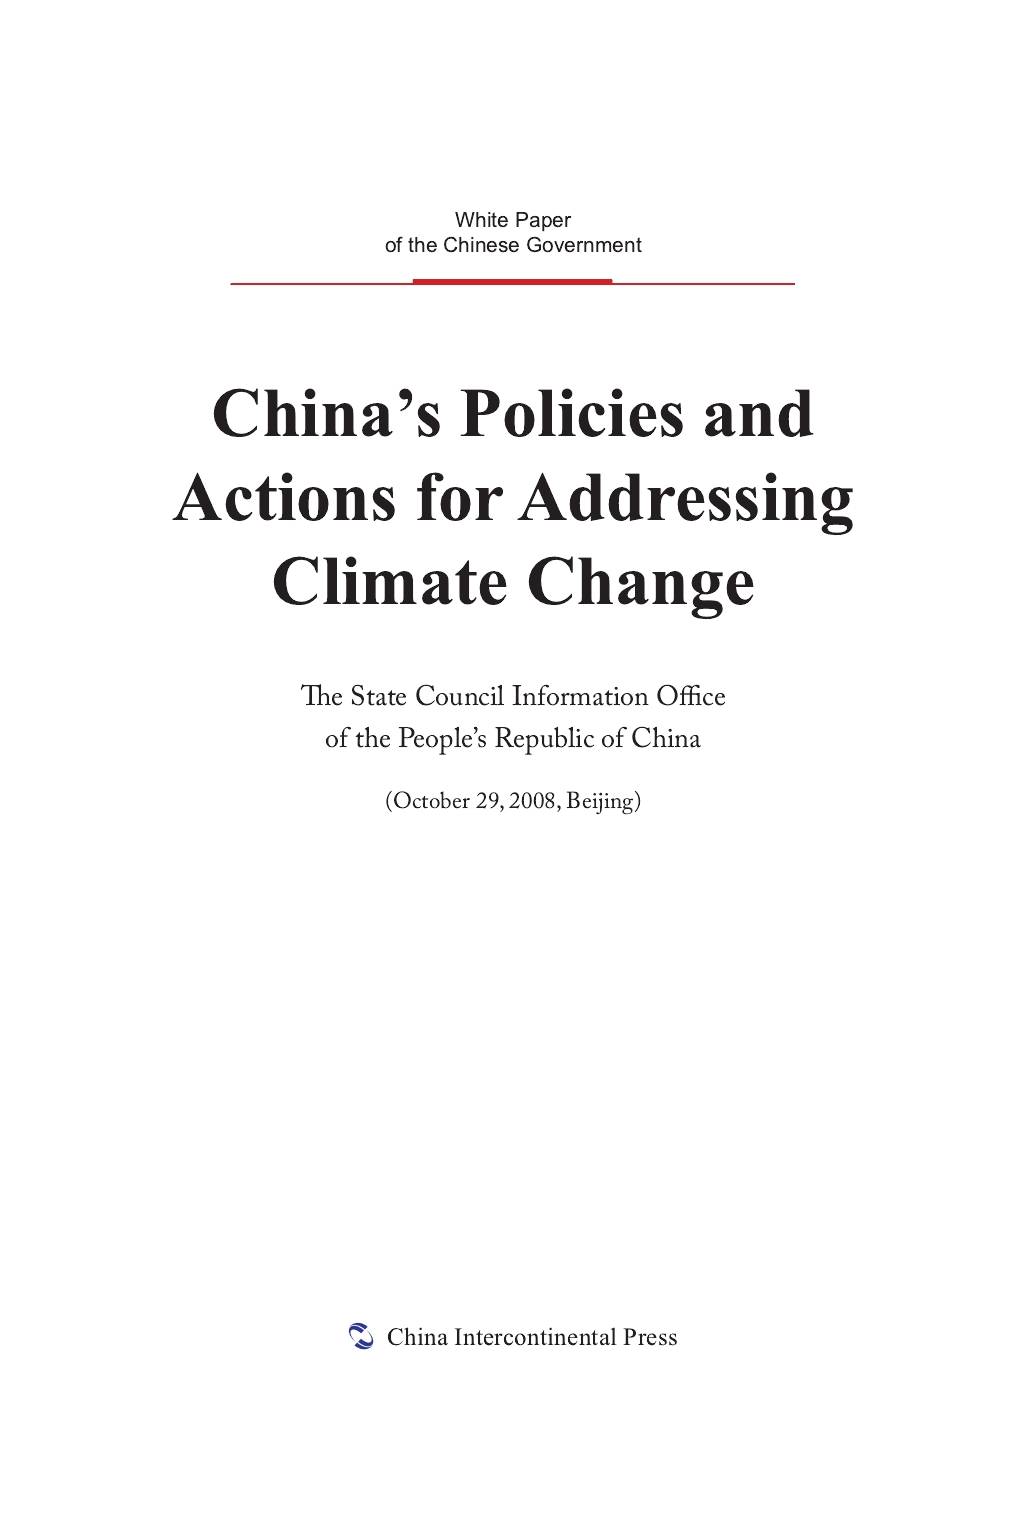 China's Policies and Actions for Addressing Climate Change